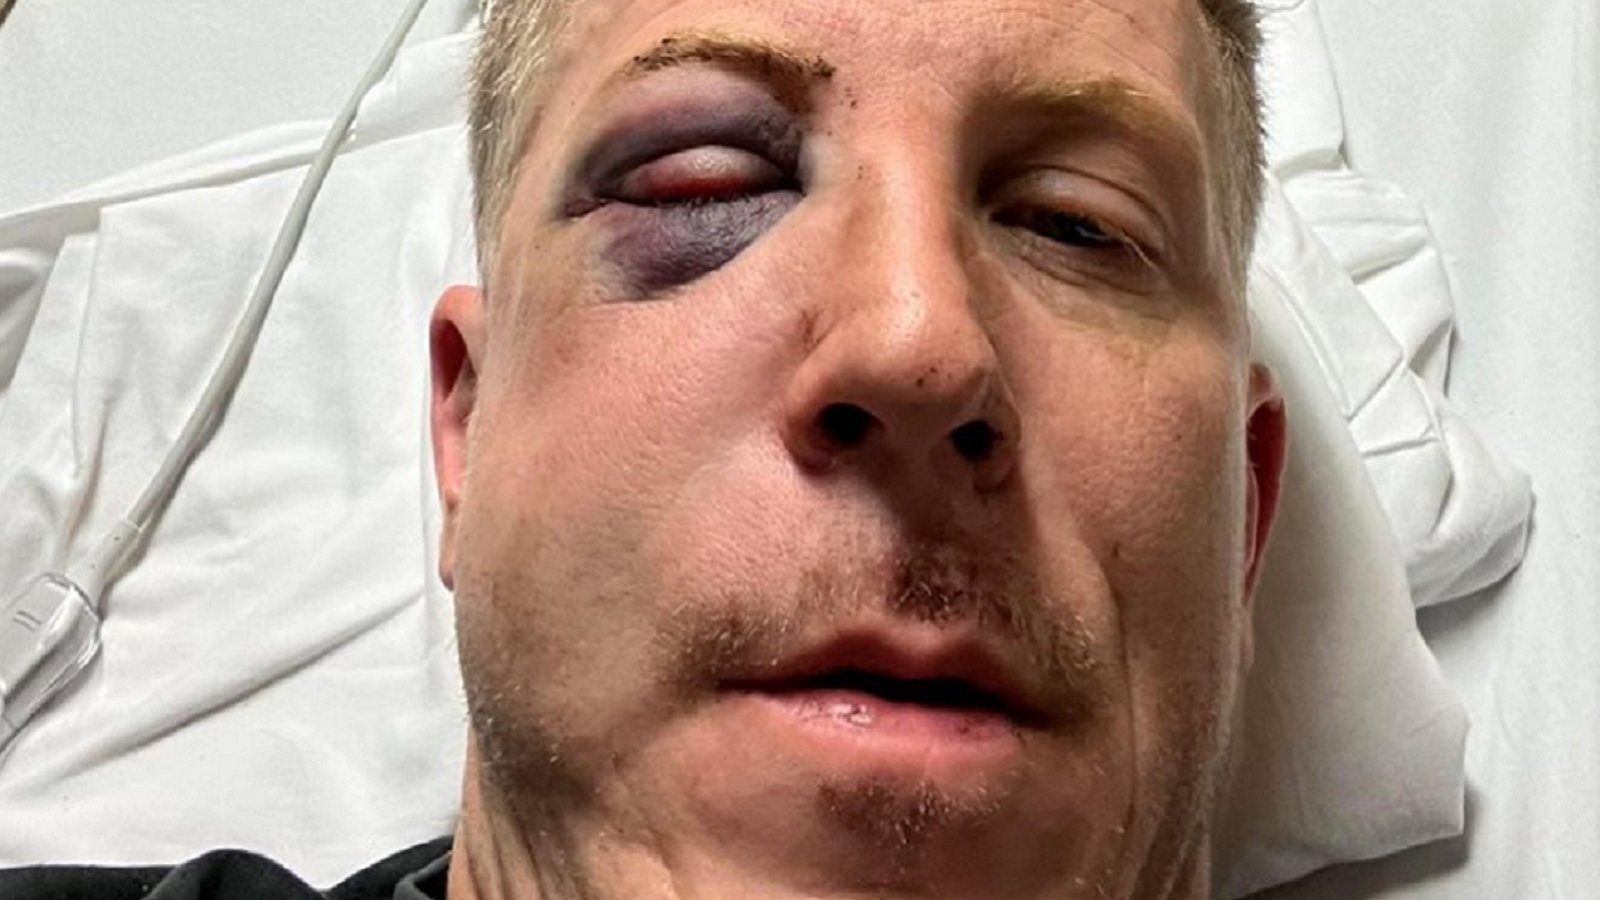 Fan brutally assaulted during Stanley Cup playoff game.